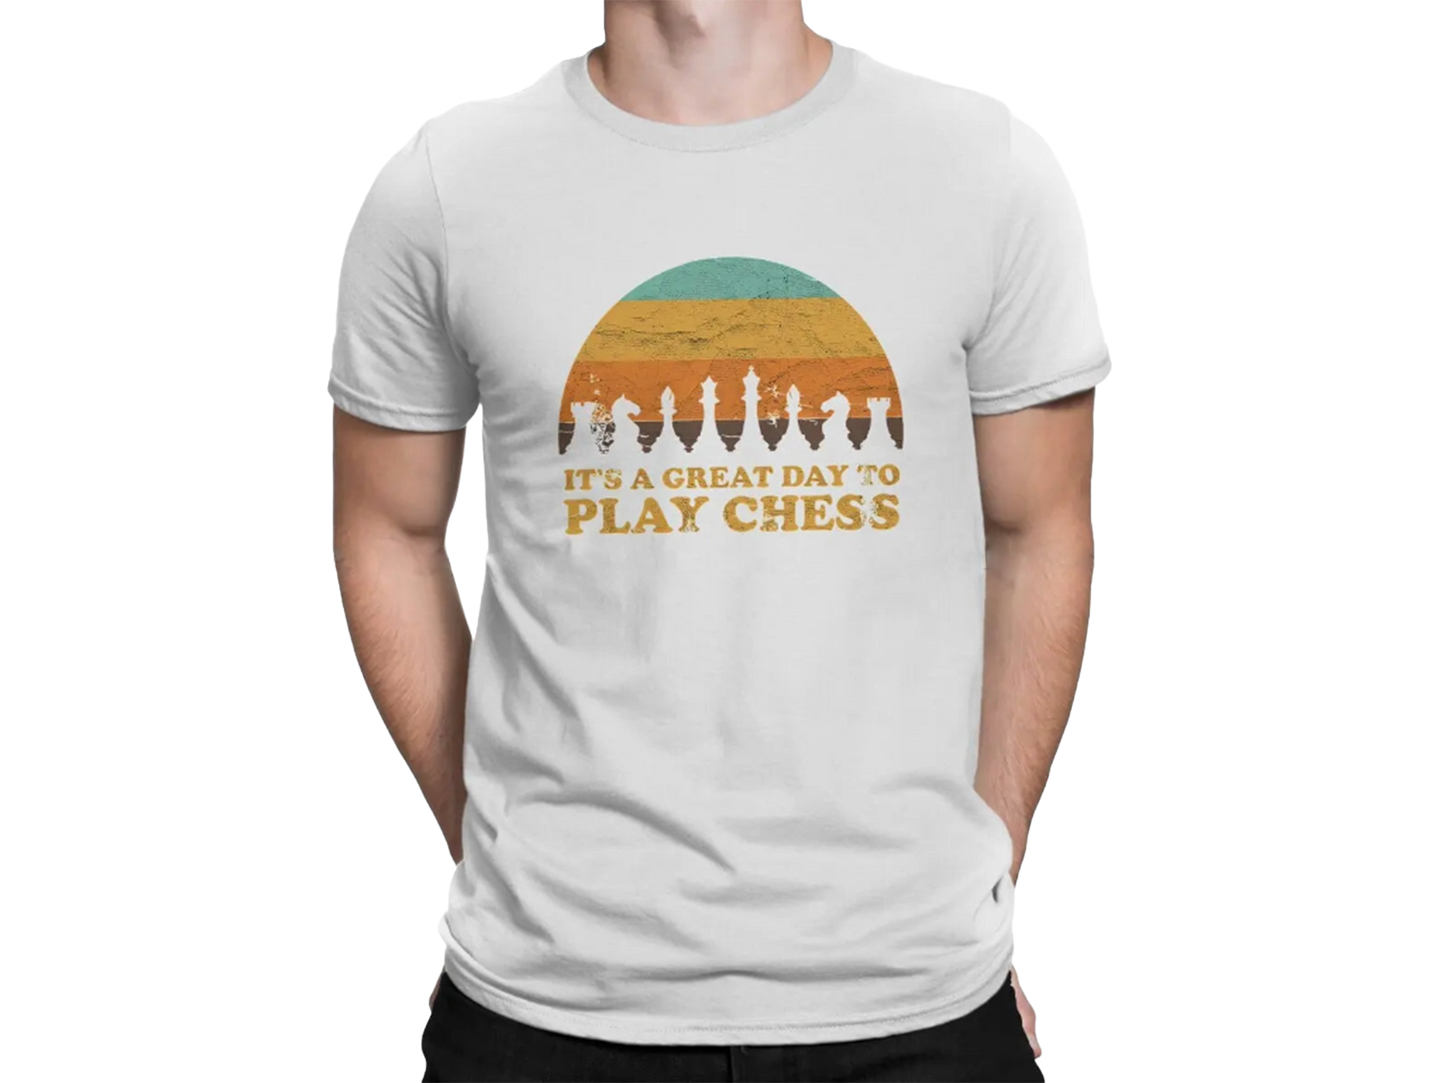 Great Day To Play Chess T-Shirt